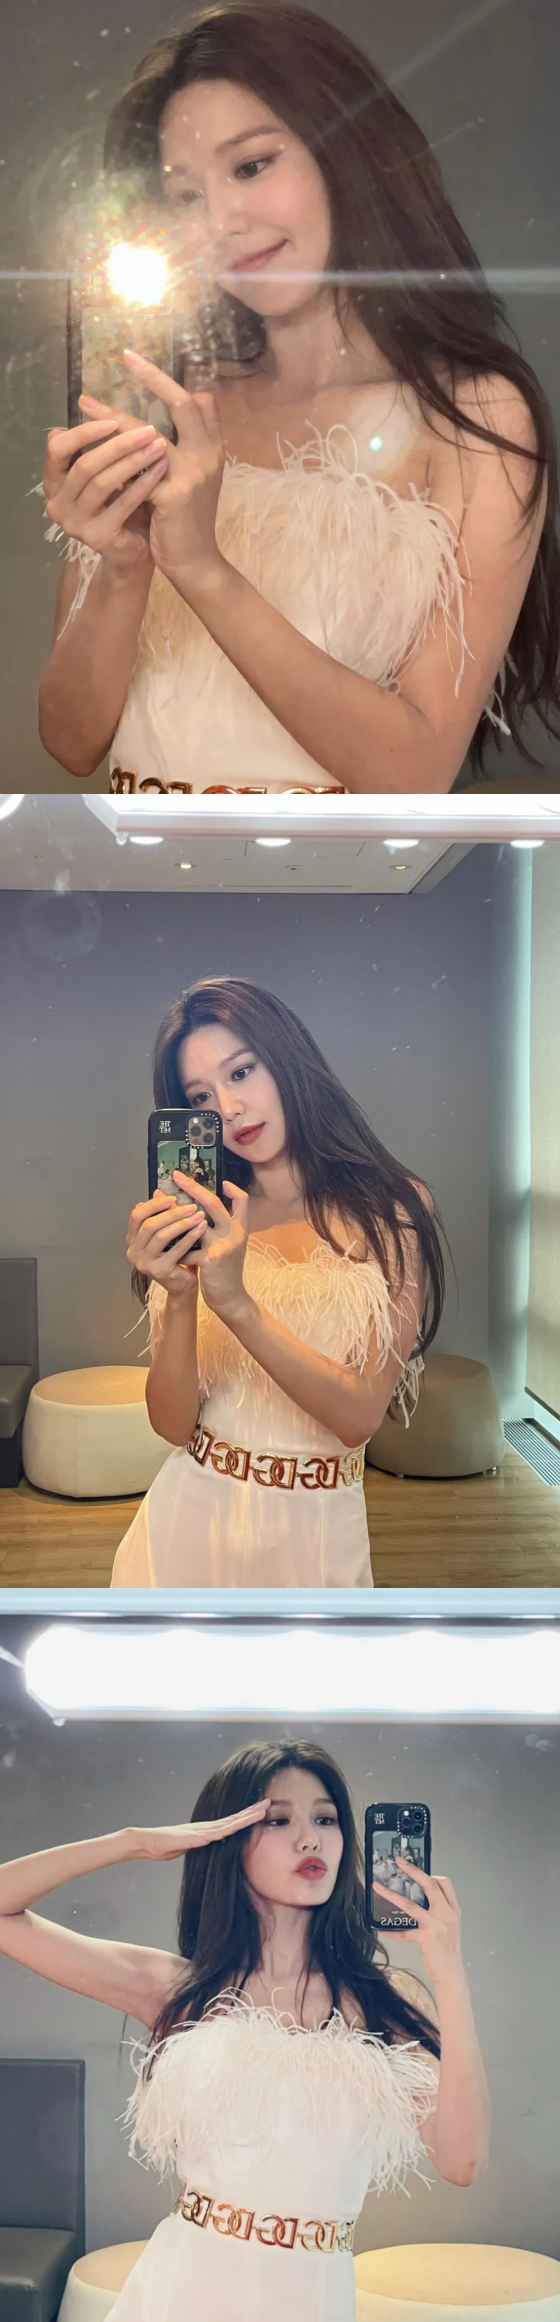 Sooyoung posted several photos on his 20th day with an article entitled Music Center GG4EVA in his instagram.In the open photo, Sooyoung is wearing a white stage costume and taking a mirror selfie.In particular, the same group Hyoyeon appeared on JTBC Knowing Brother on the 13th, and the long straight hair of Sooyoung, which became a hot topic, is attracting attention.Despite the point, Sooyoung added a smile to the face of Hyoyeon with his hair at the moment of ending pose on KBS 2TV Music Bank stage on the 19th.Meanwhile, the group Girls Generation, which Sooyoung belongs to, released its regular 7th album Forever 1 on the 15th anniversary of its debut.